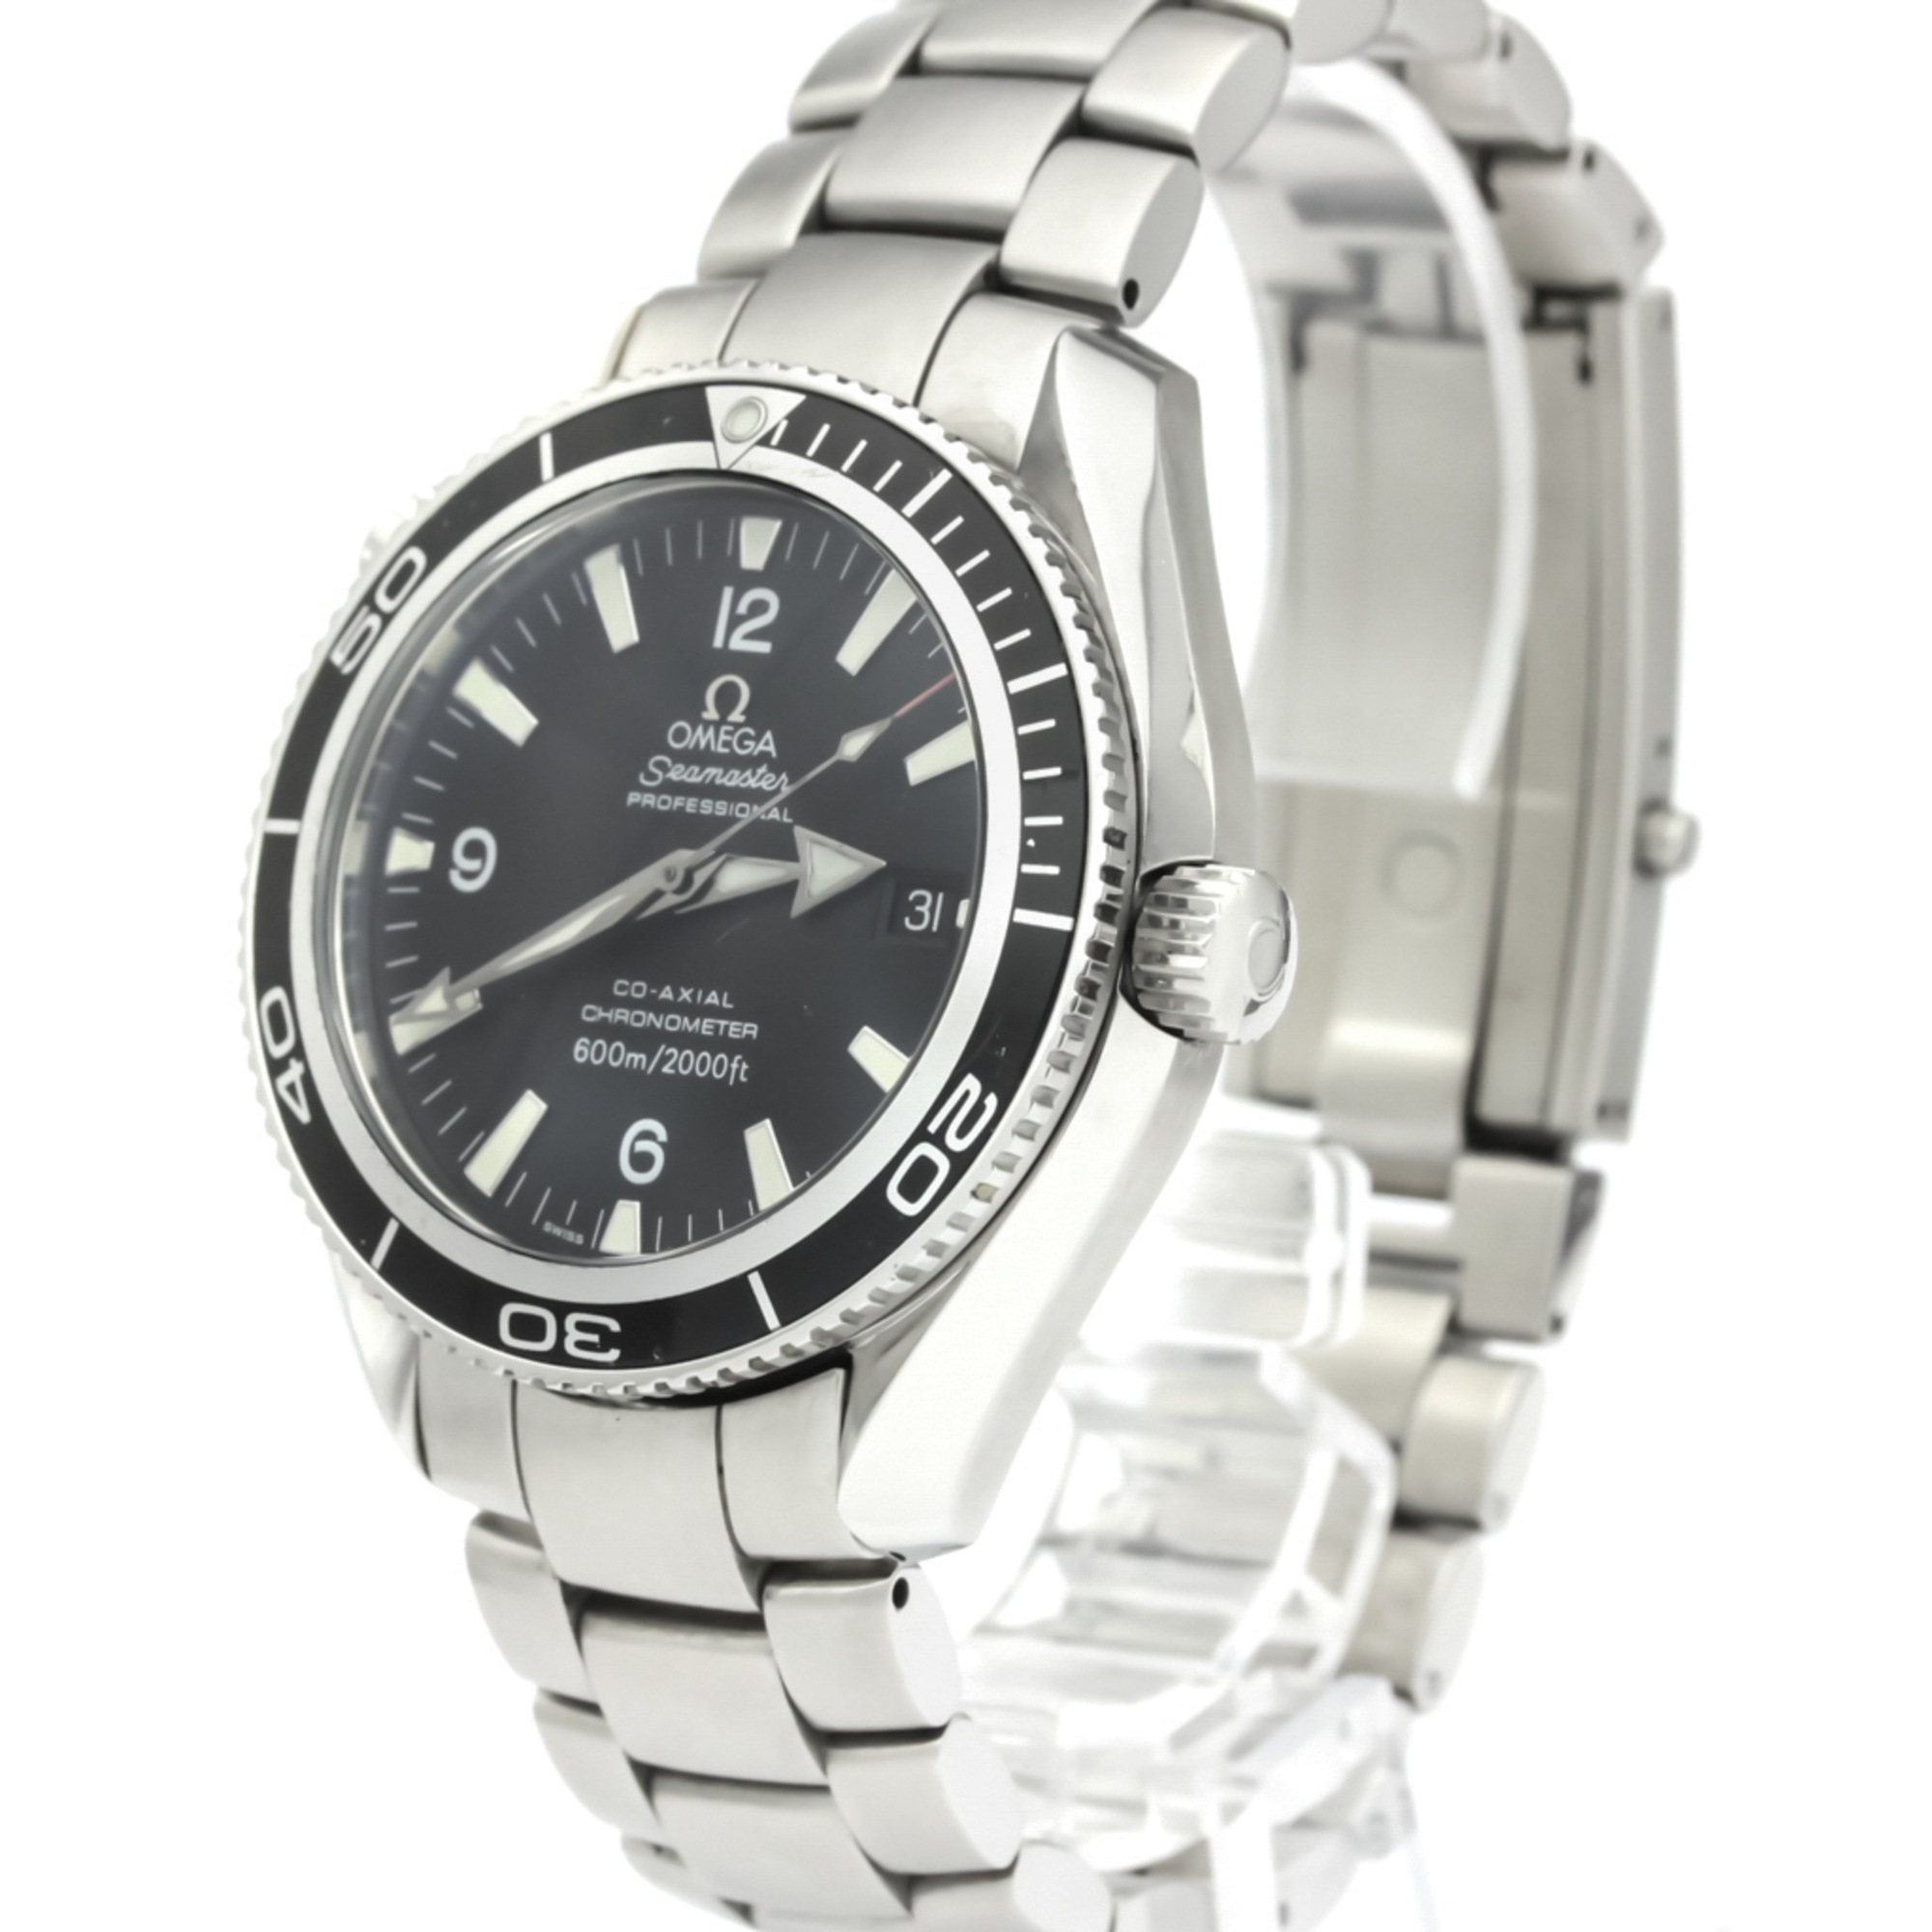 Omega Seamaster Automatic Stainless Steel Men's Sports Watch 2201.50